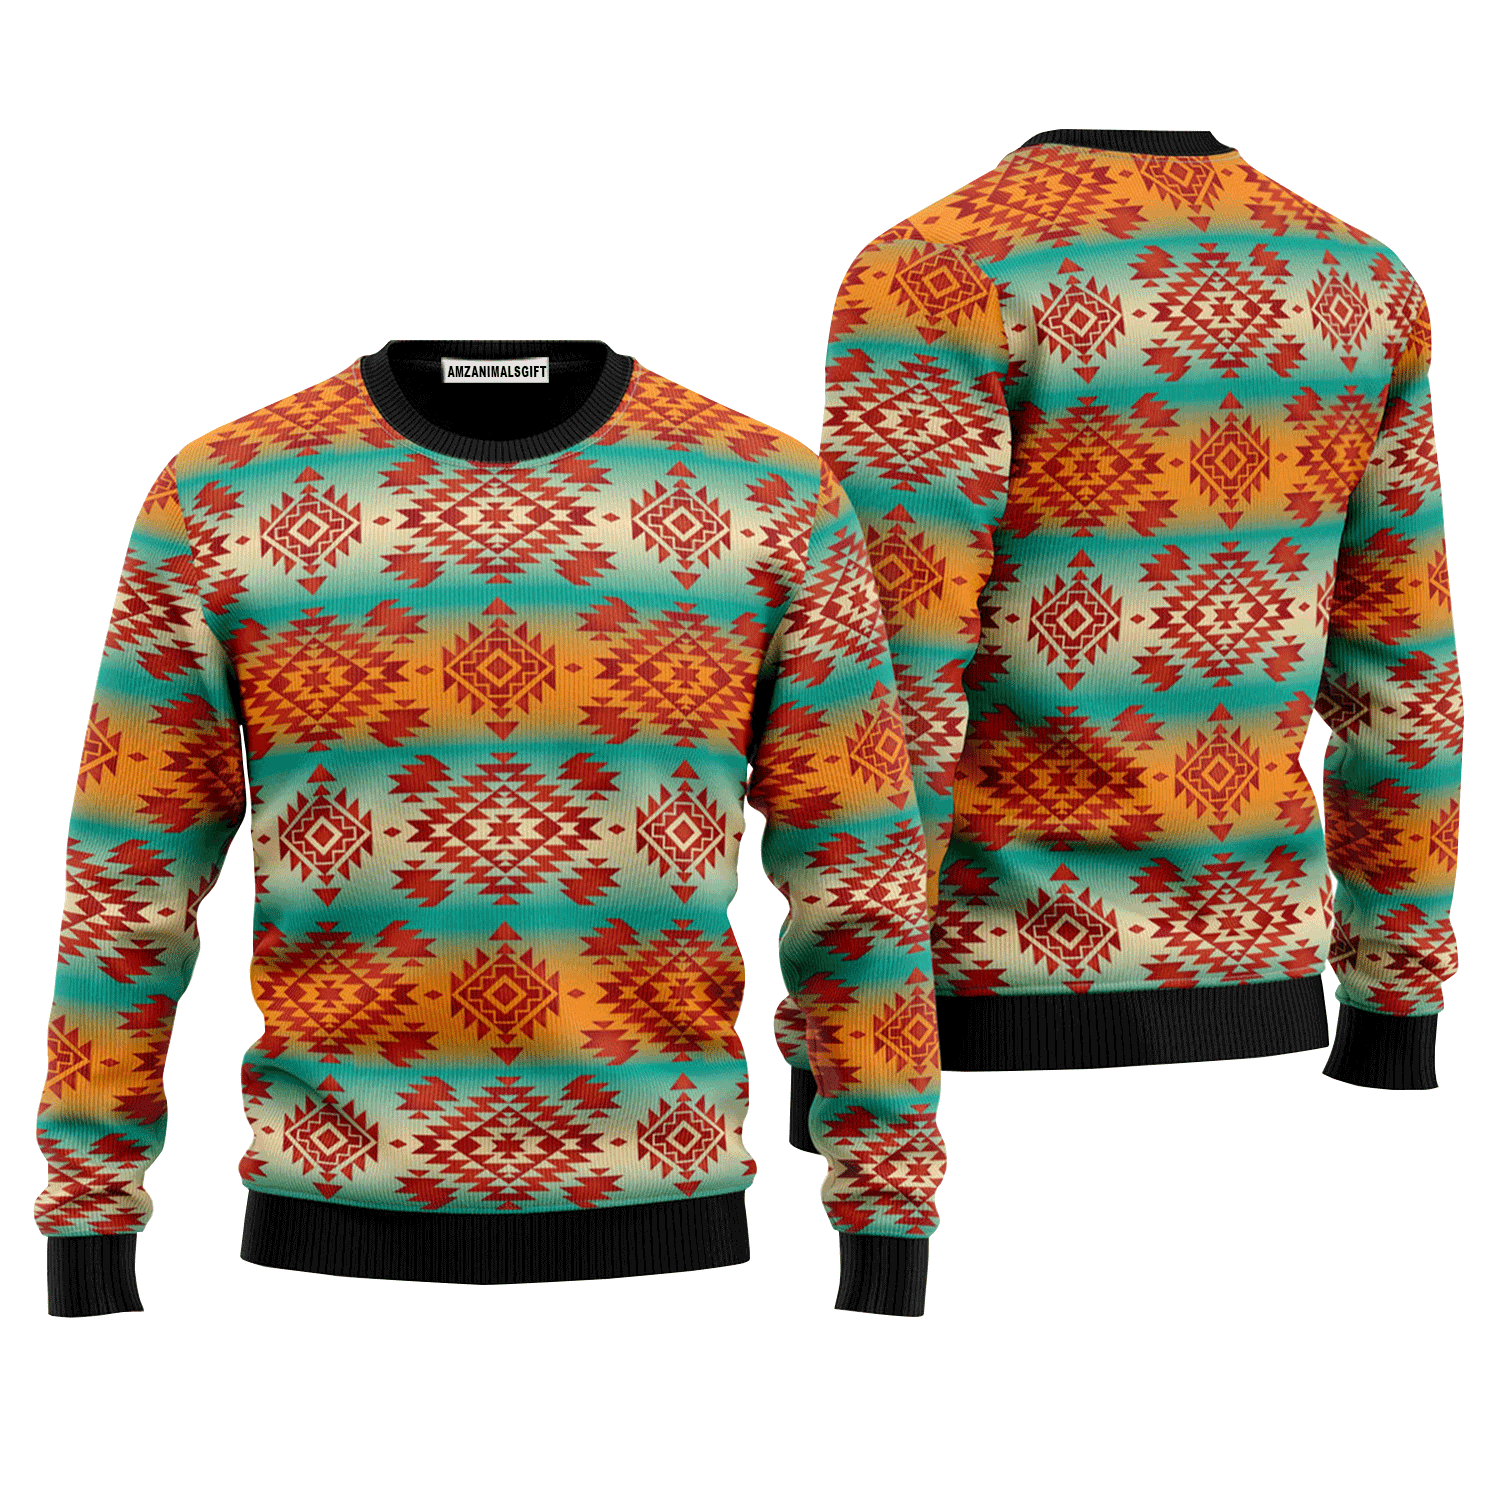 Native American Fabric Pattern Sweater, Ugly Sweater For Men & Women, Perfect Outfit For Christmas New Year Autumn Winter